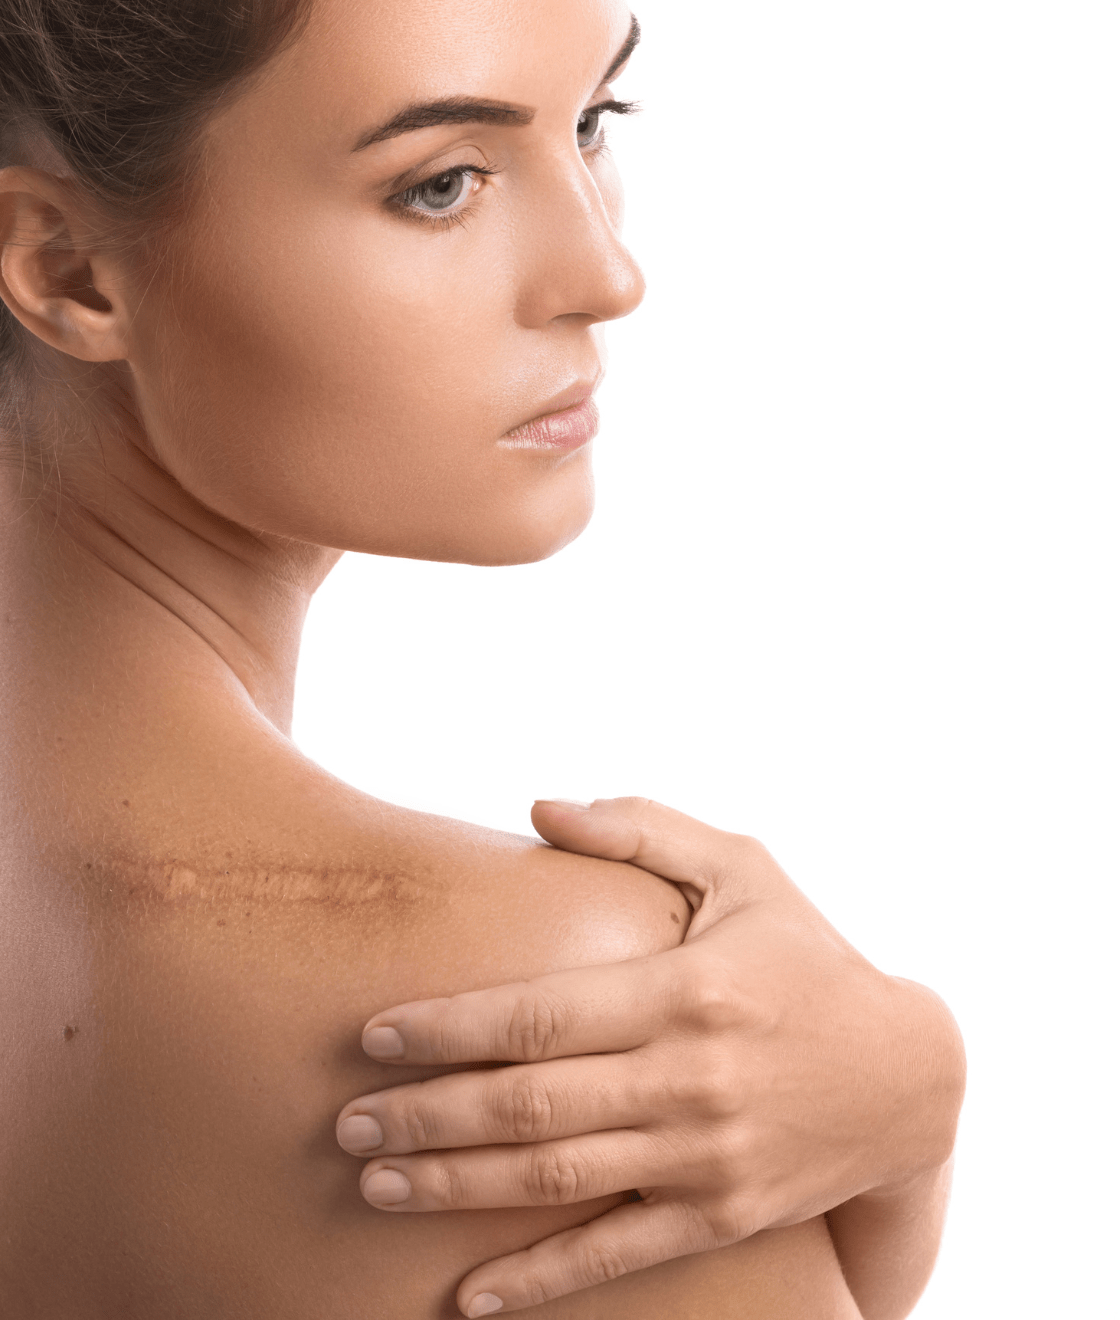 Beautiful woman with a scar on her shoulder